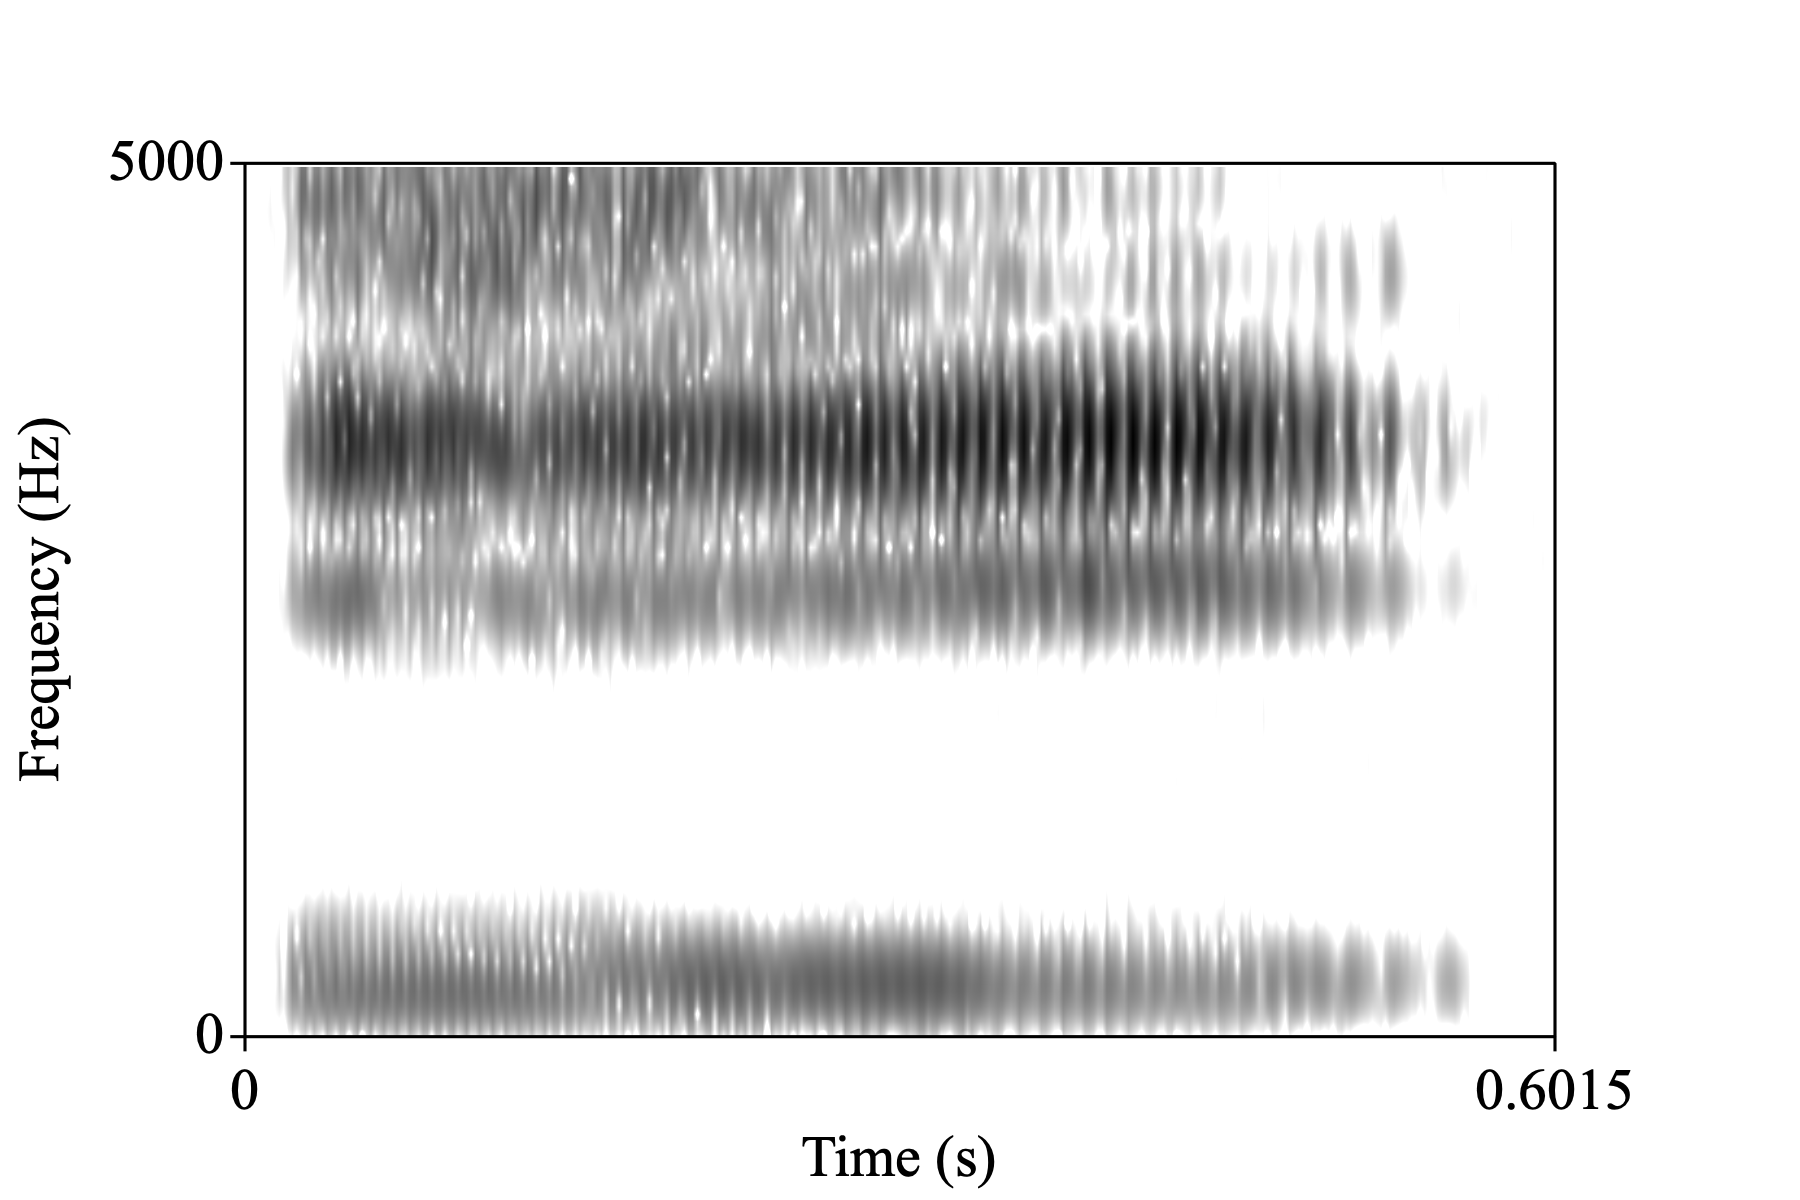 A spectrogram of the vowel /i/ generated by praat.